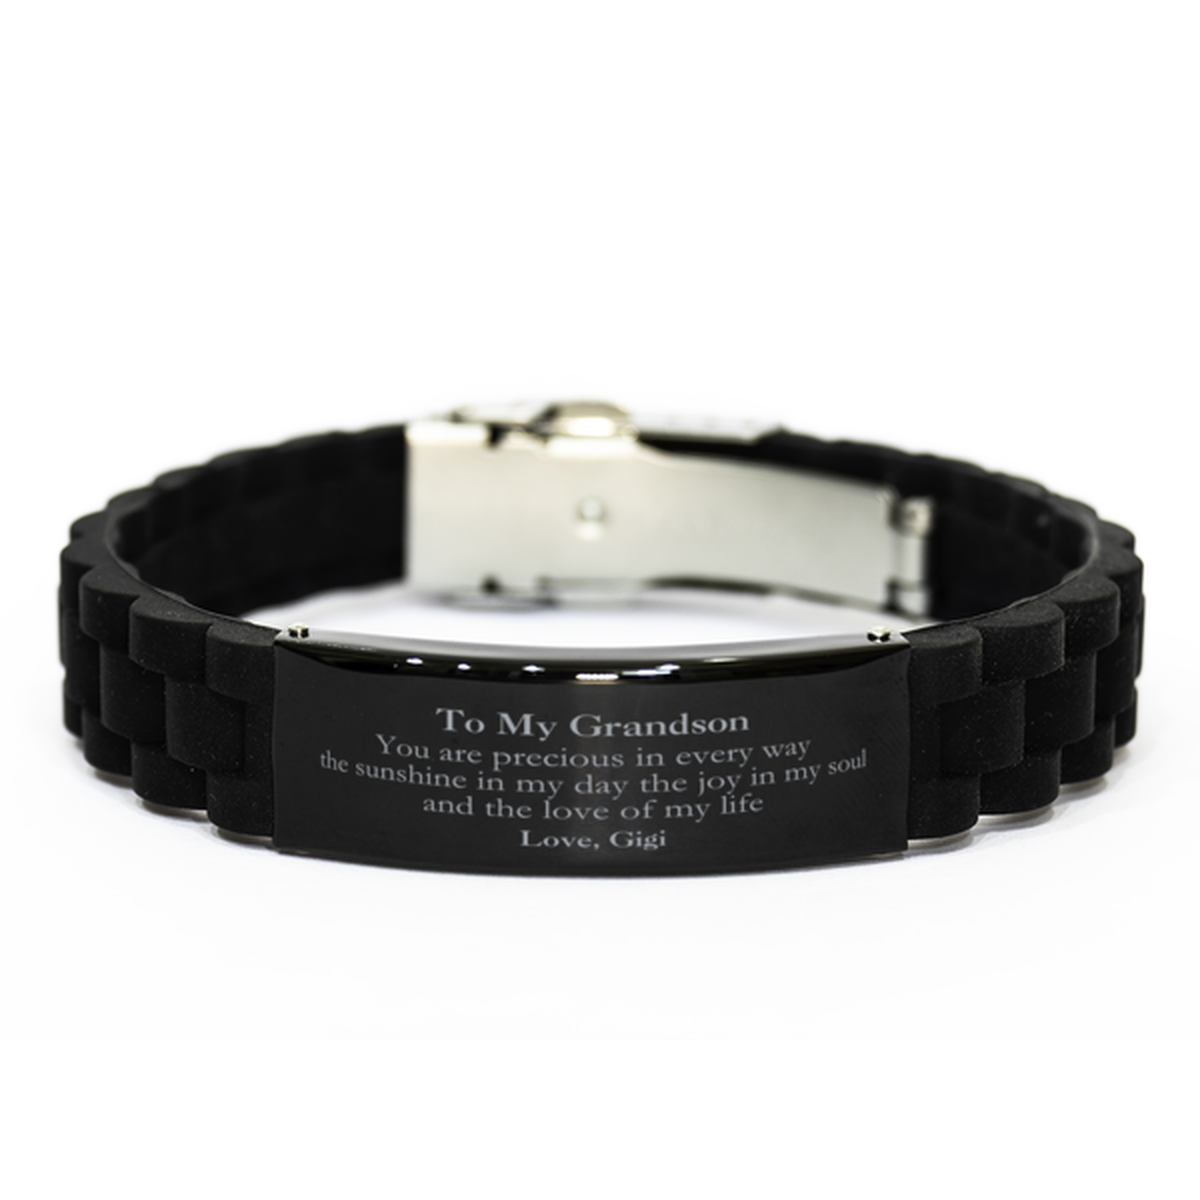 Graduation Gifts for Grandson Black Glidelock Clasp Bracelet Present from Gigi, Christmas Grandson Birthday Gifts Grandson You are precious in every way the sunshine in my day. Love, Gigi